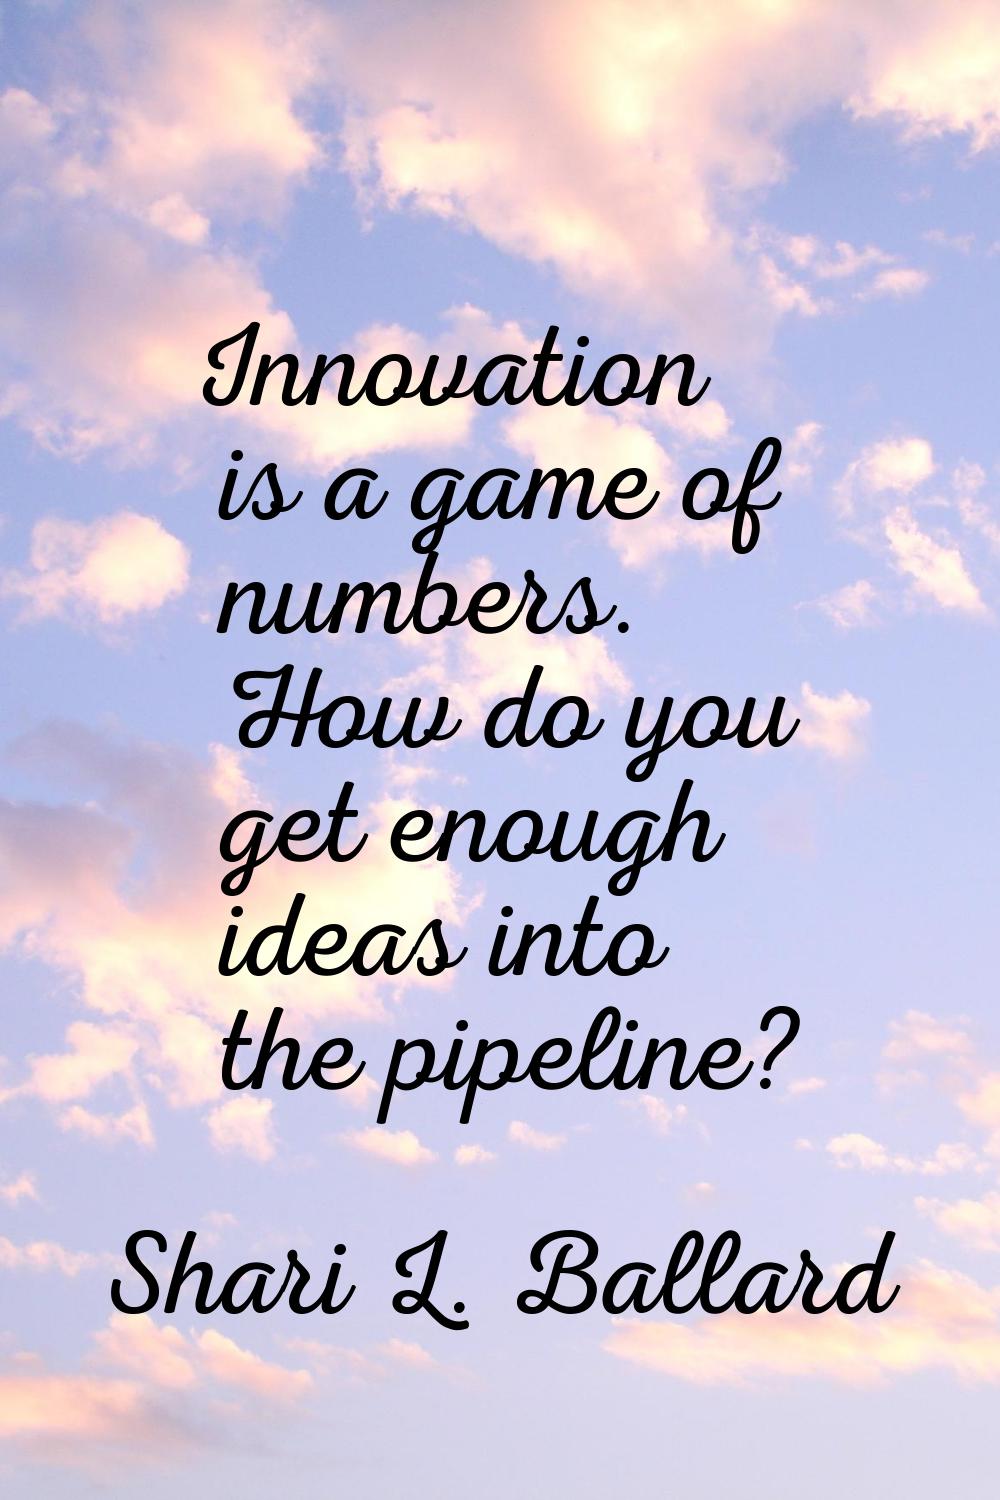 Innovation is a game of numbers. How do you get enough ideas into the pipeline?